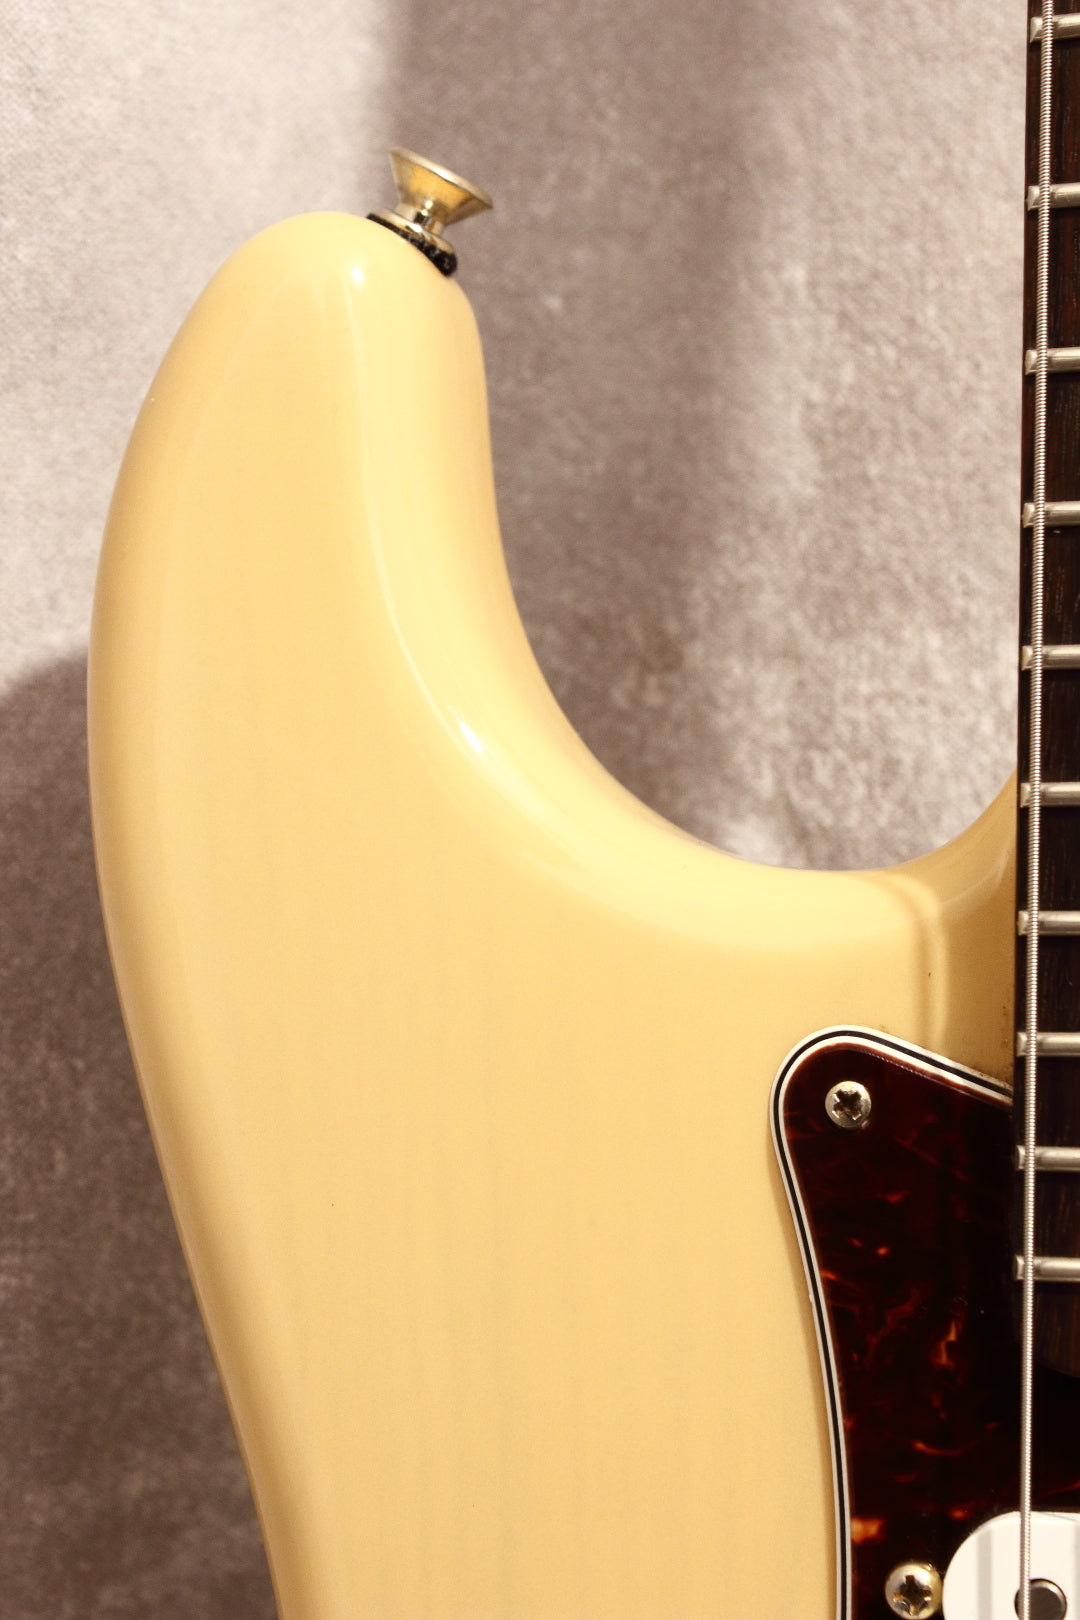 Fender Deluxe Stratocaster Butterscotch 2012